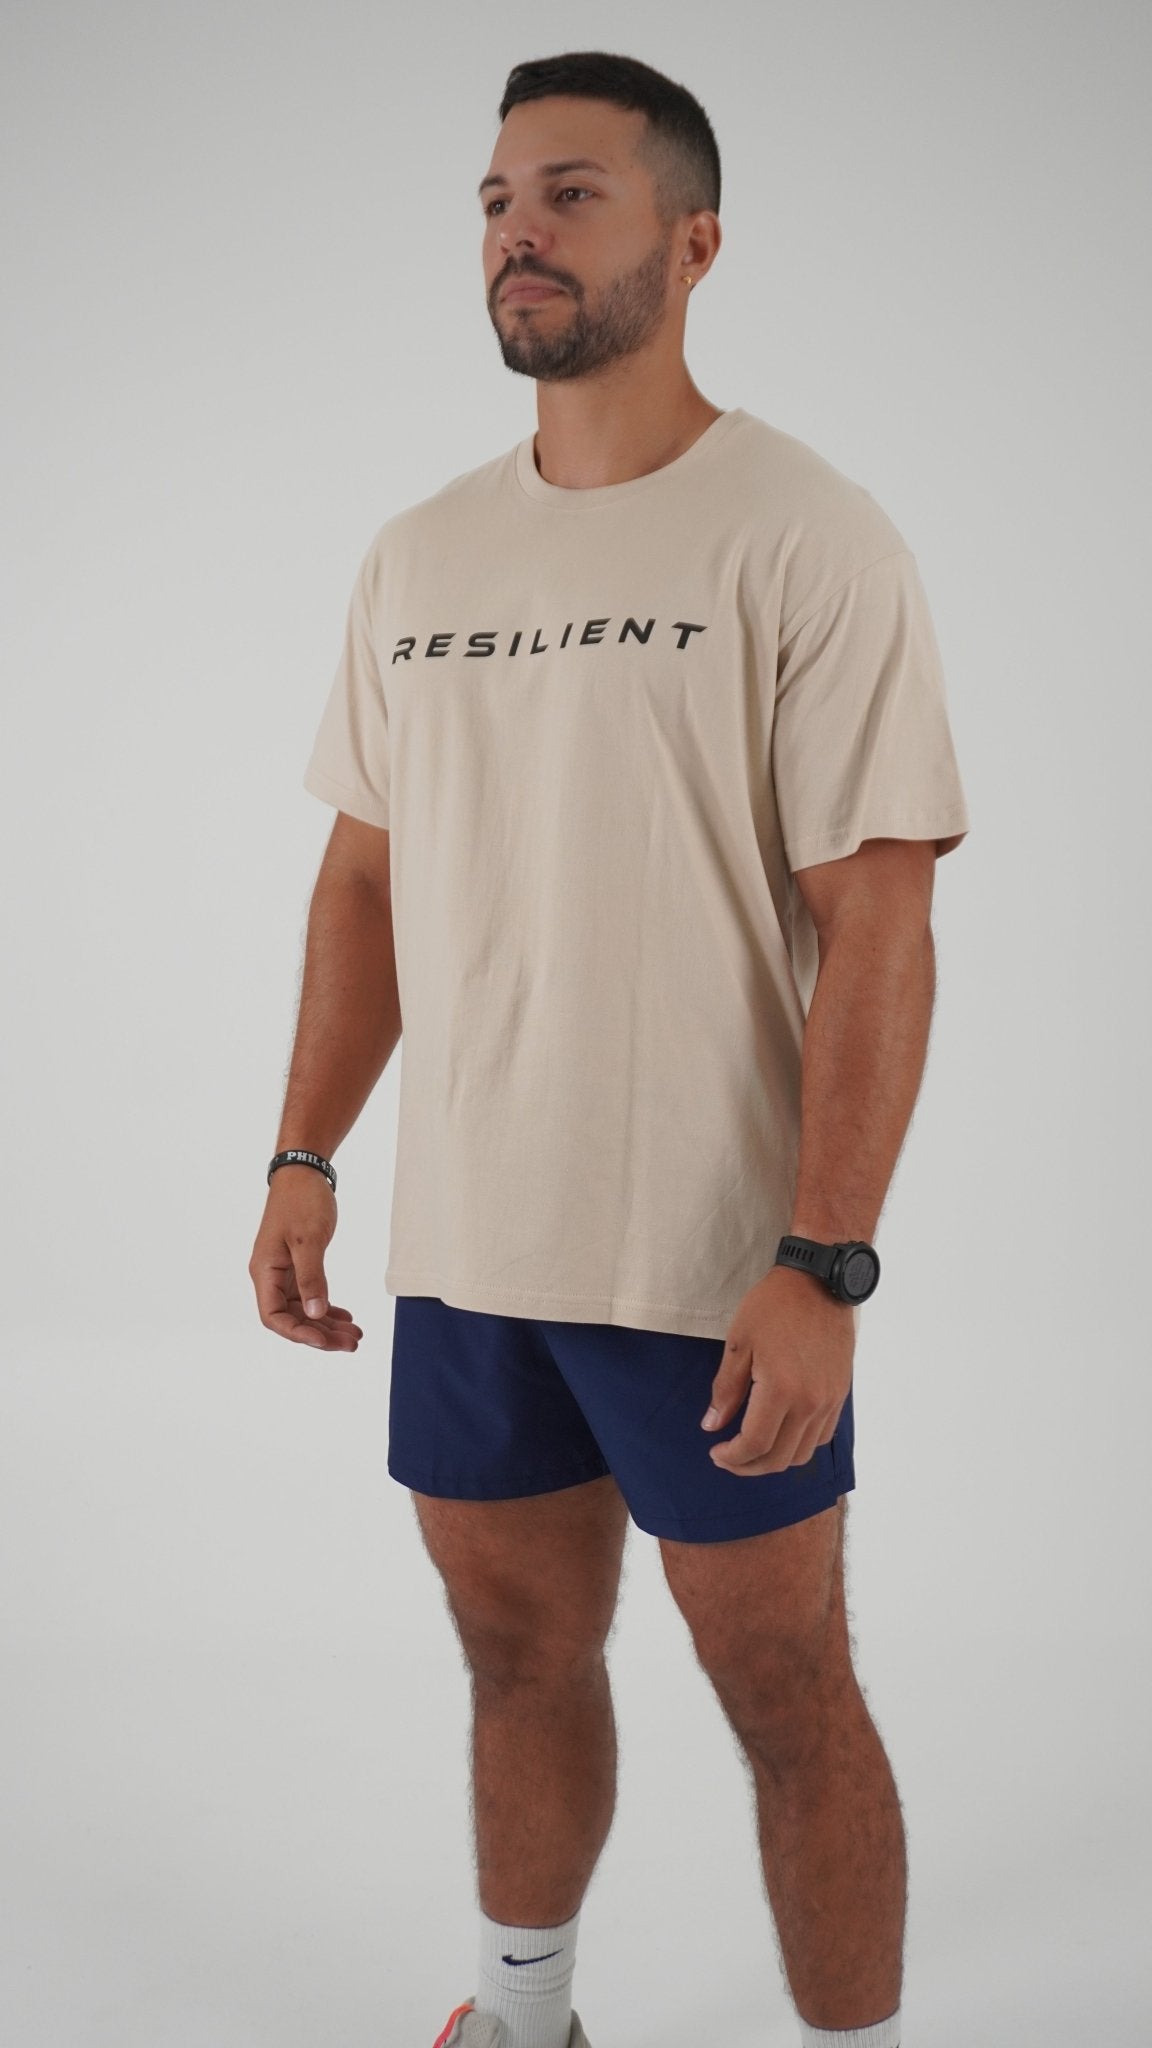 UltraRelax Tee - Resilient Active